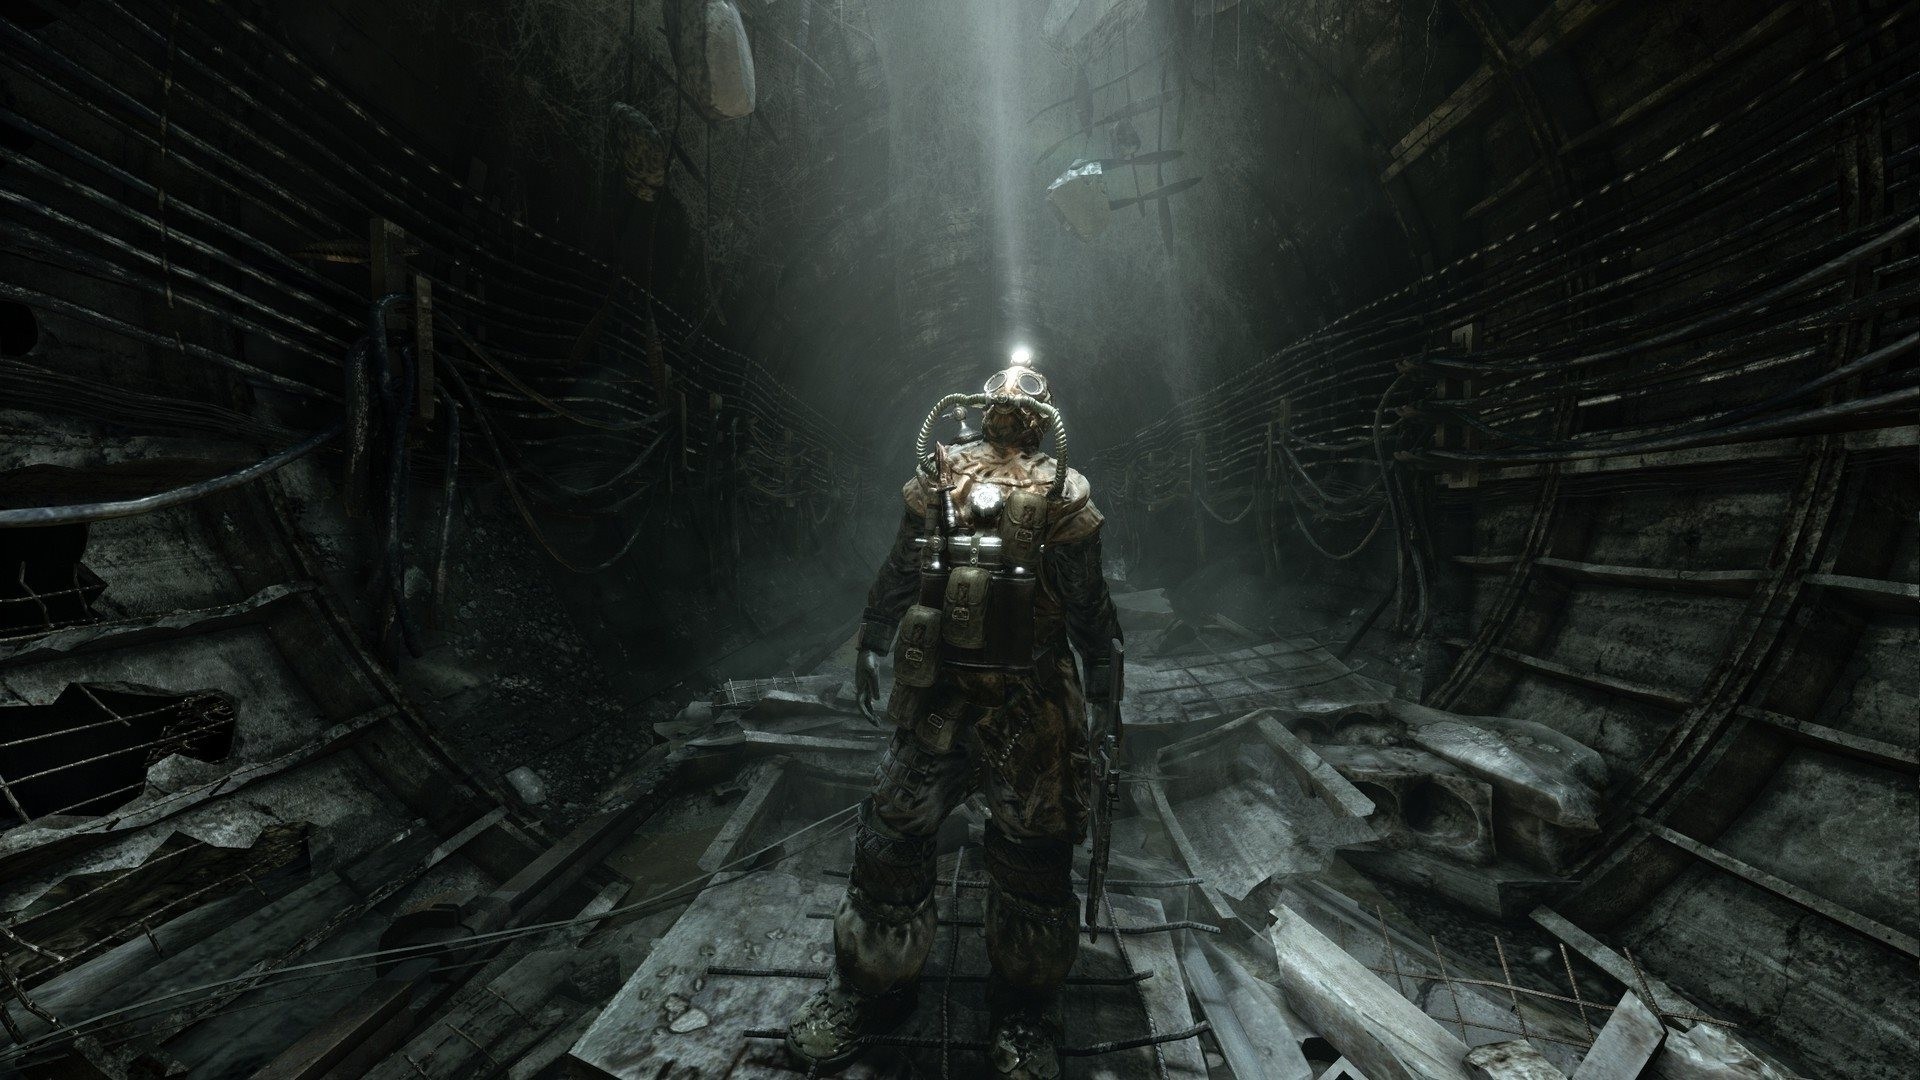 Metro 2033 Video Game Art Video Games 2010 Year Apocalyptic 1920x1080